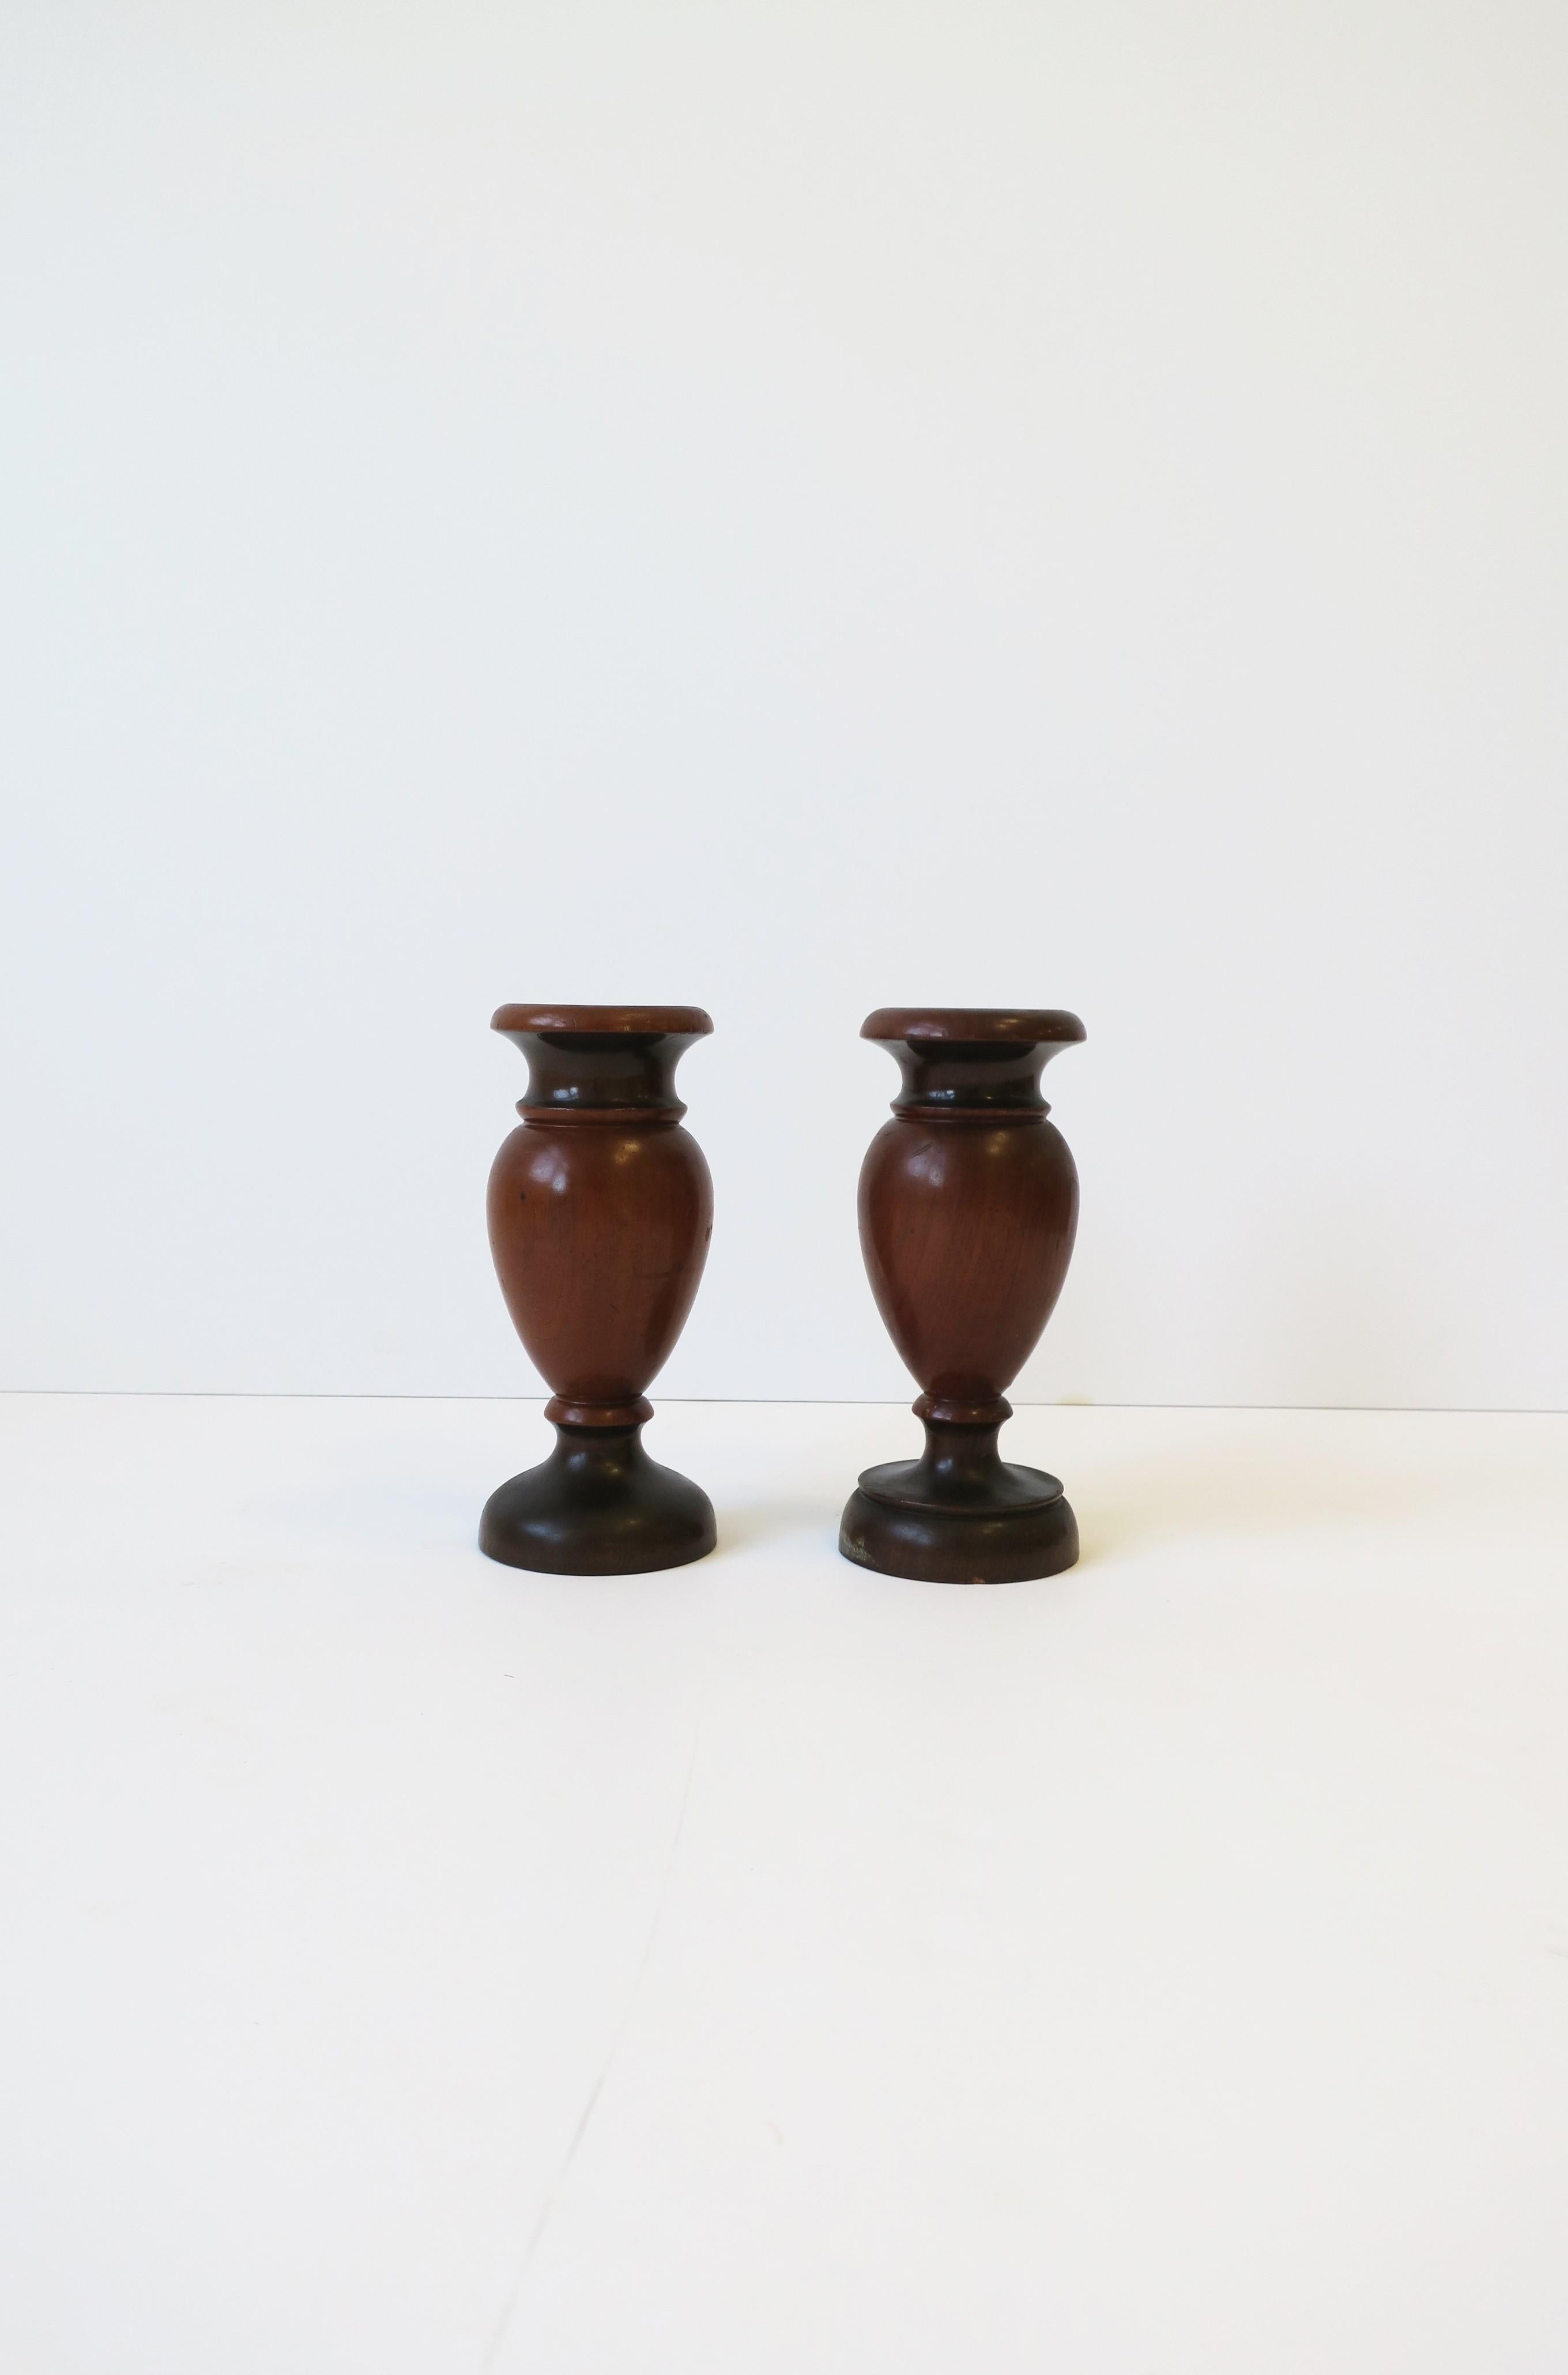 English Turned Walnut Urn Wood Spill Vases, Pair, circa 19th Century For Sale 2